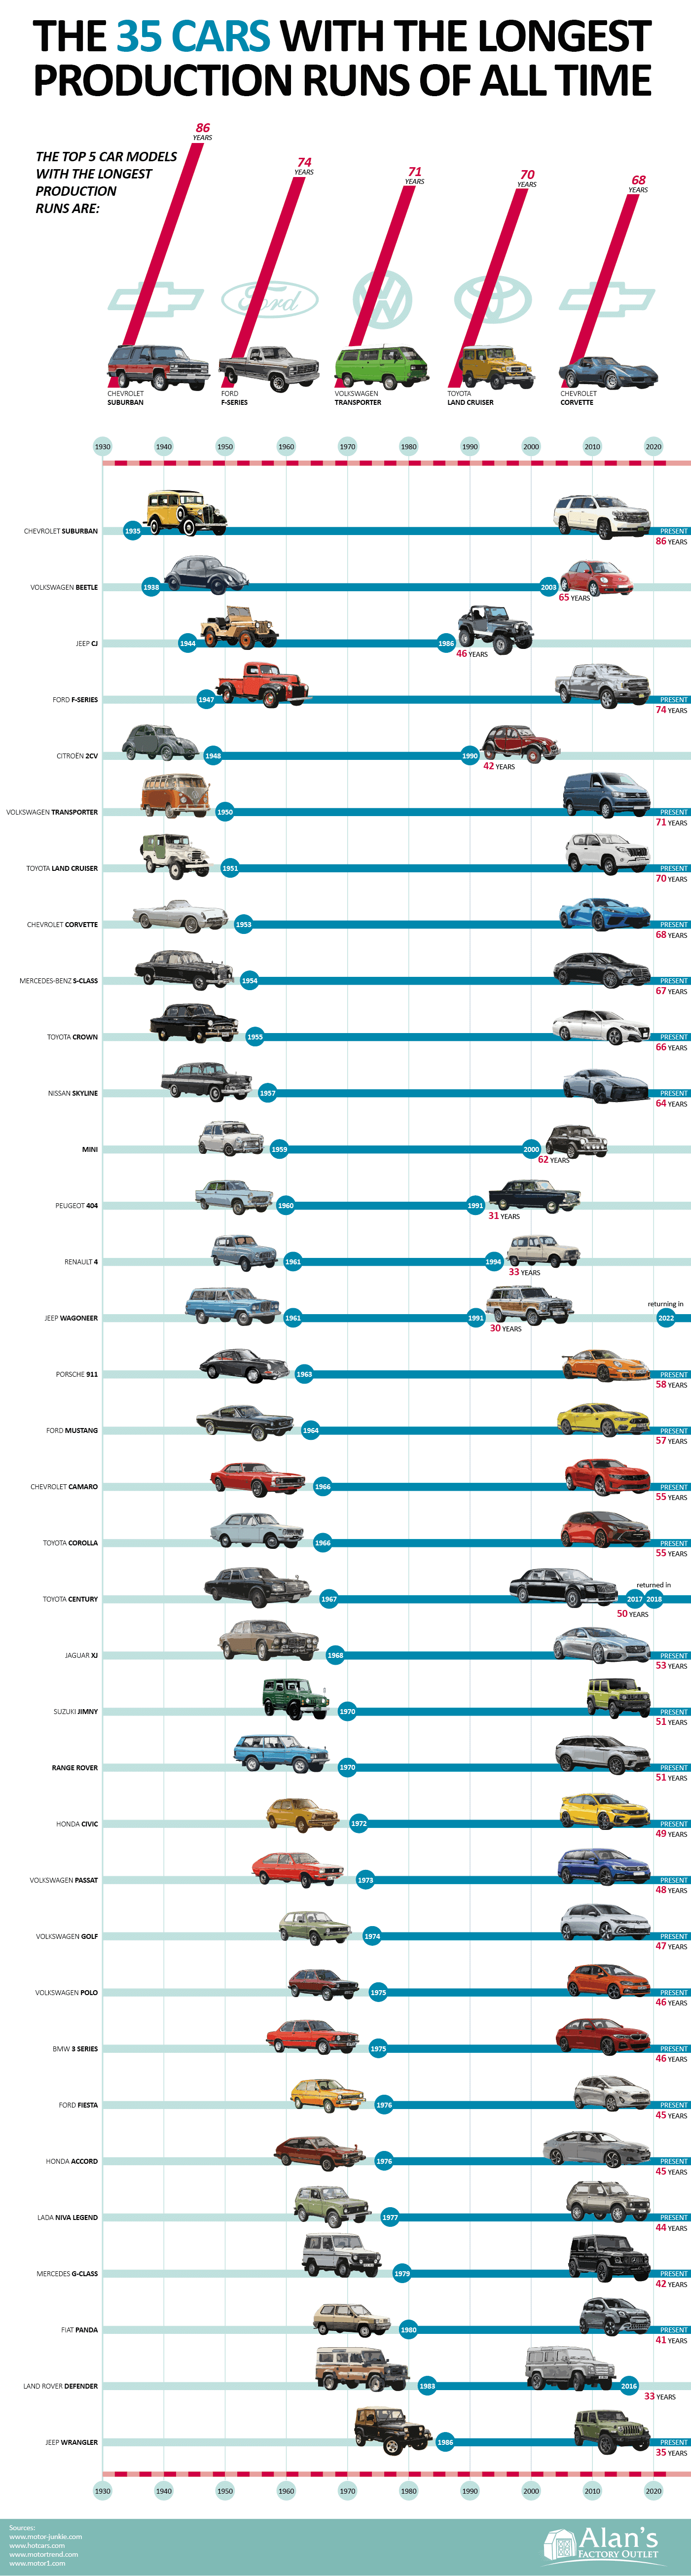 35 Cars With the Longest Production Runs